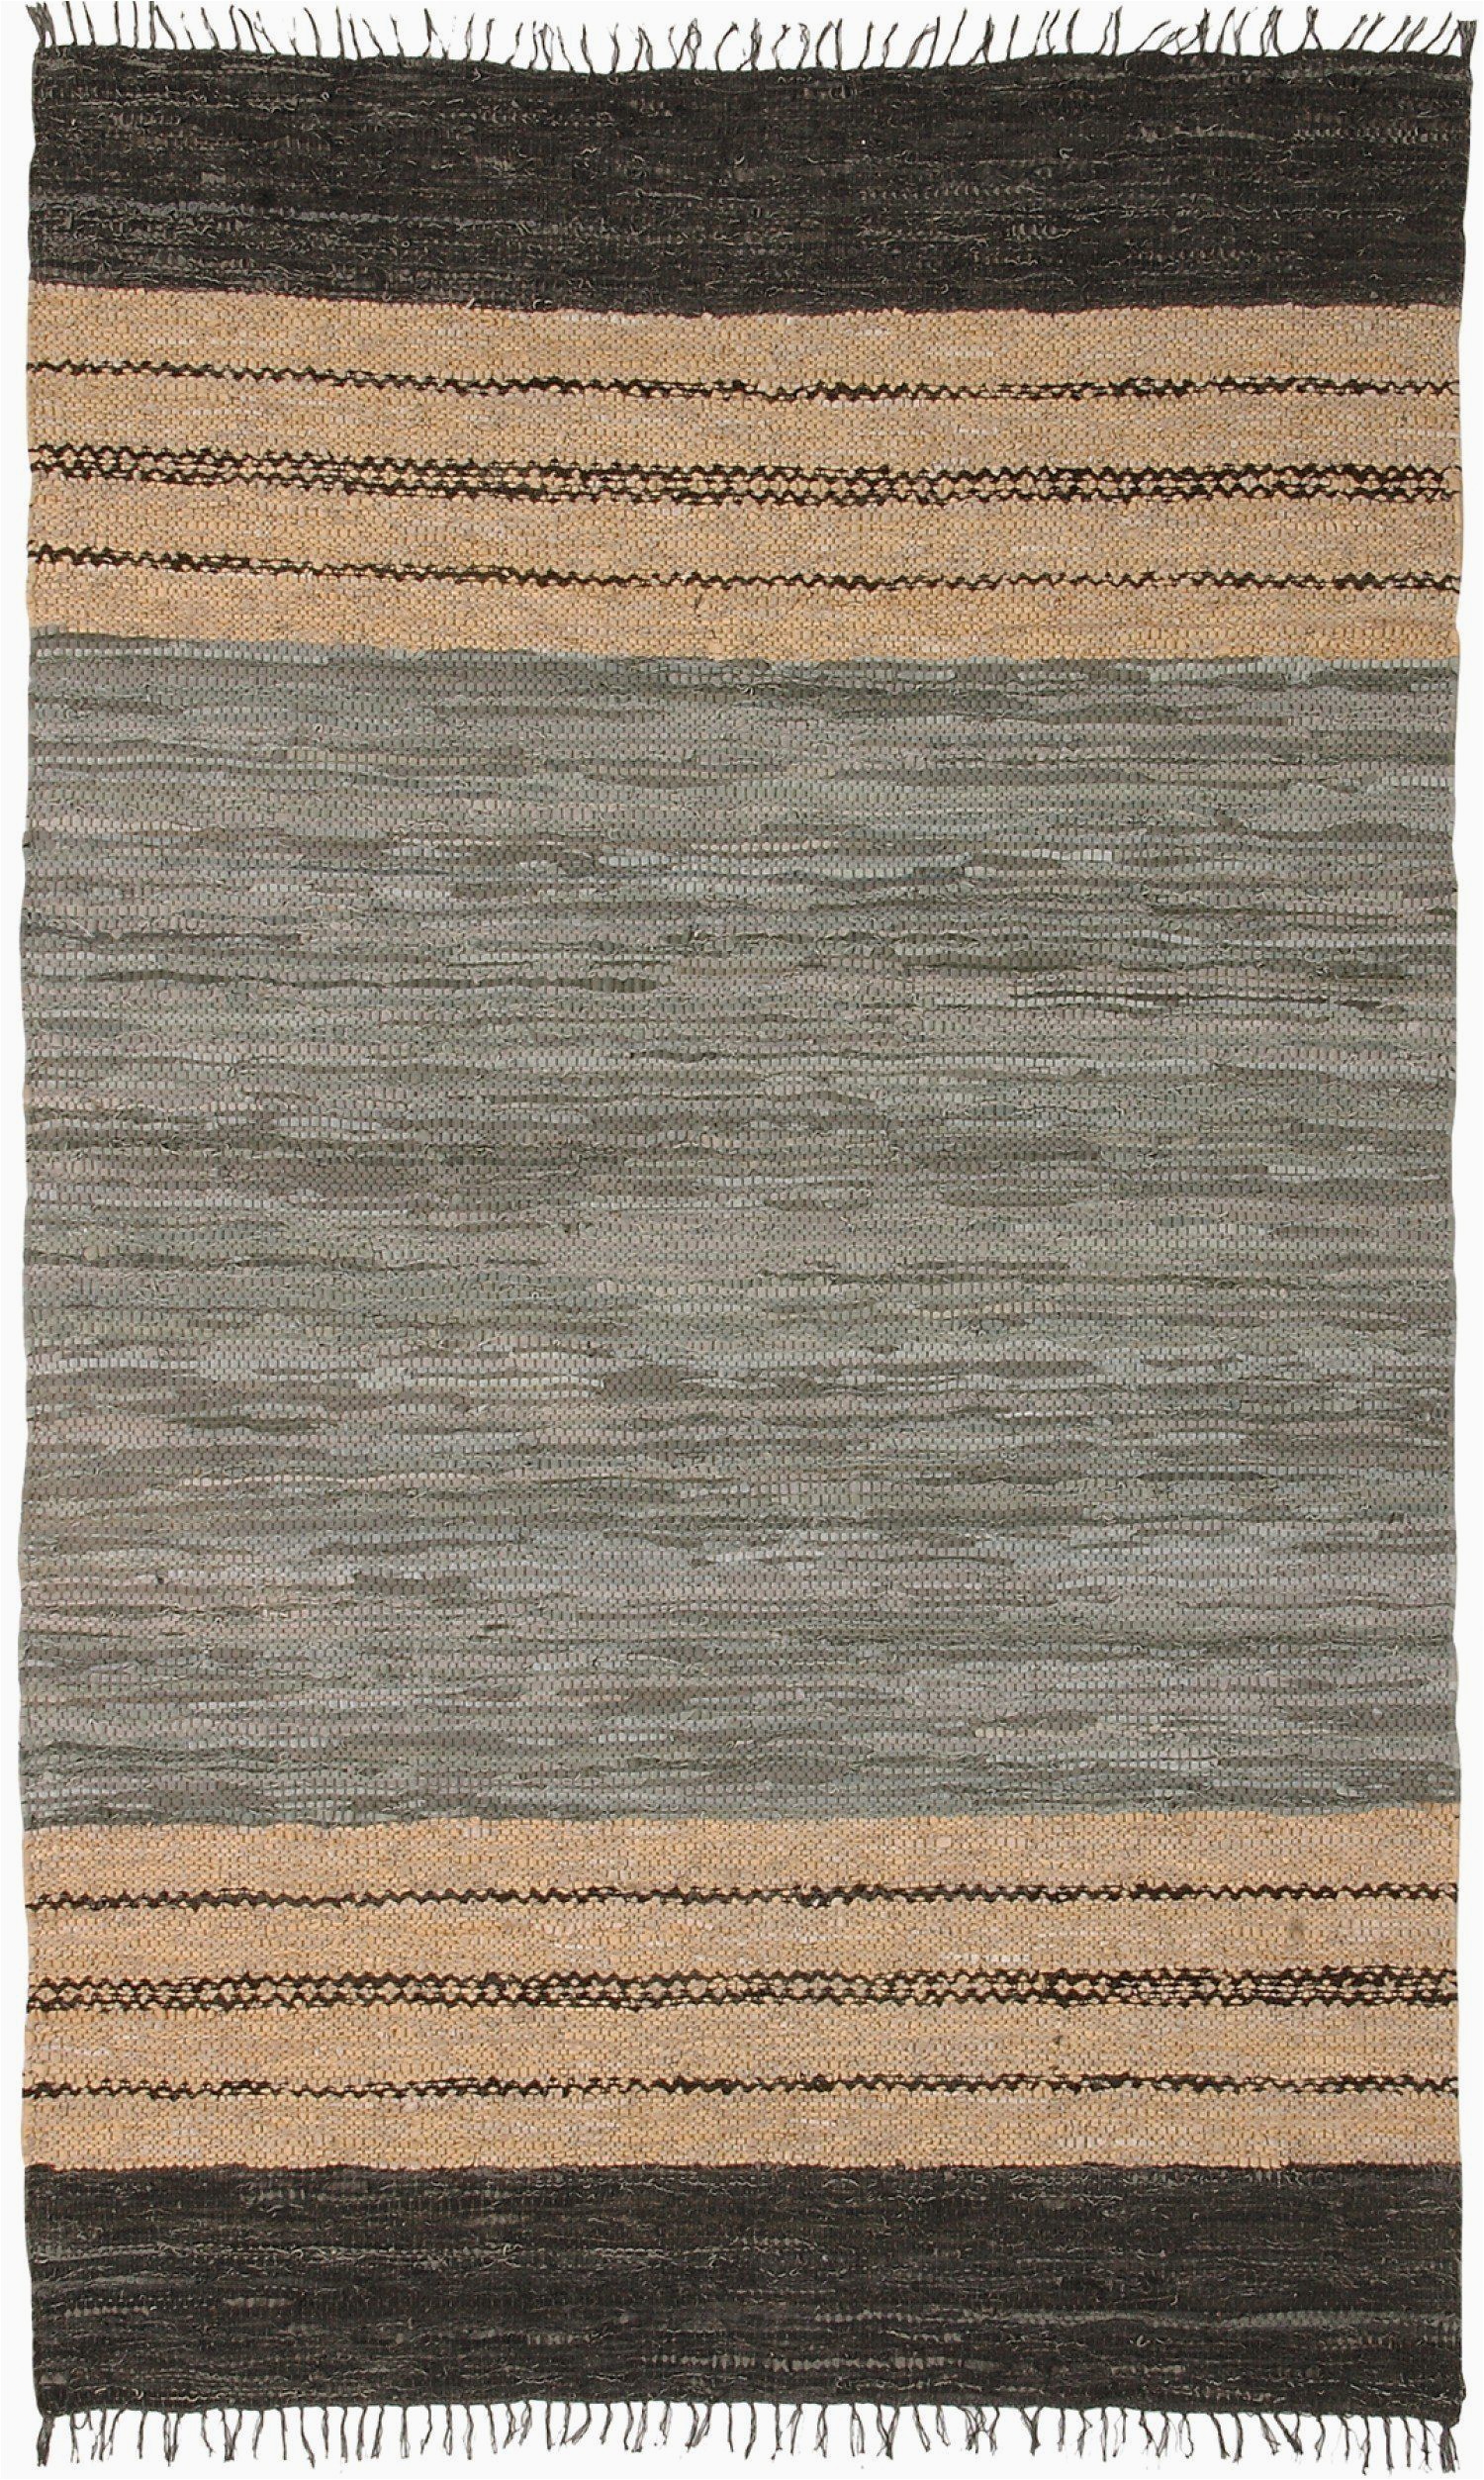 Area Rugs Tan and Gray Leather Ehden Le066 Gray Gray Black Tan Rug